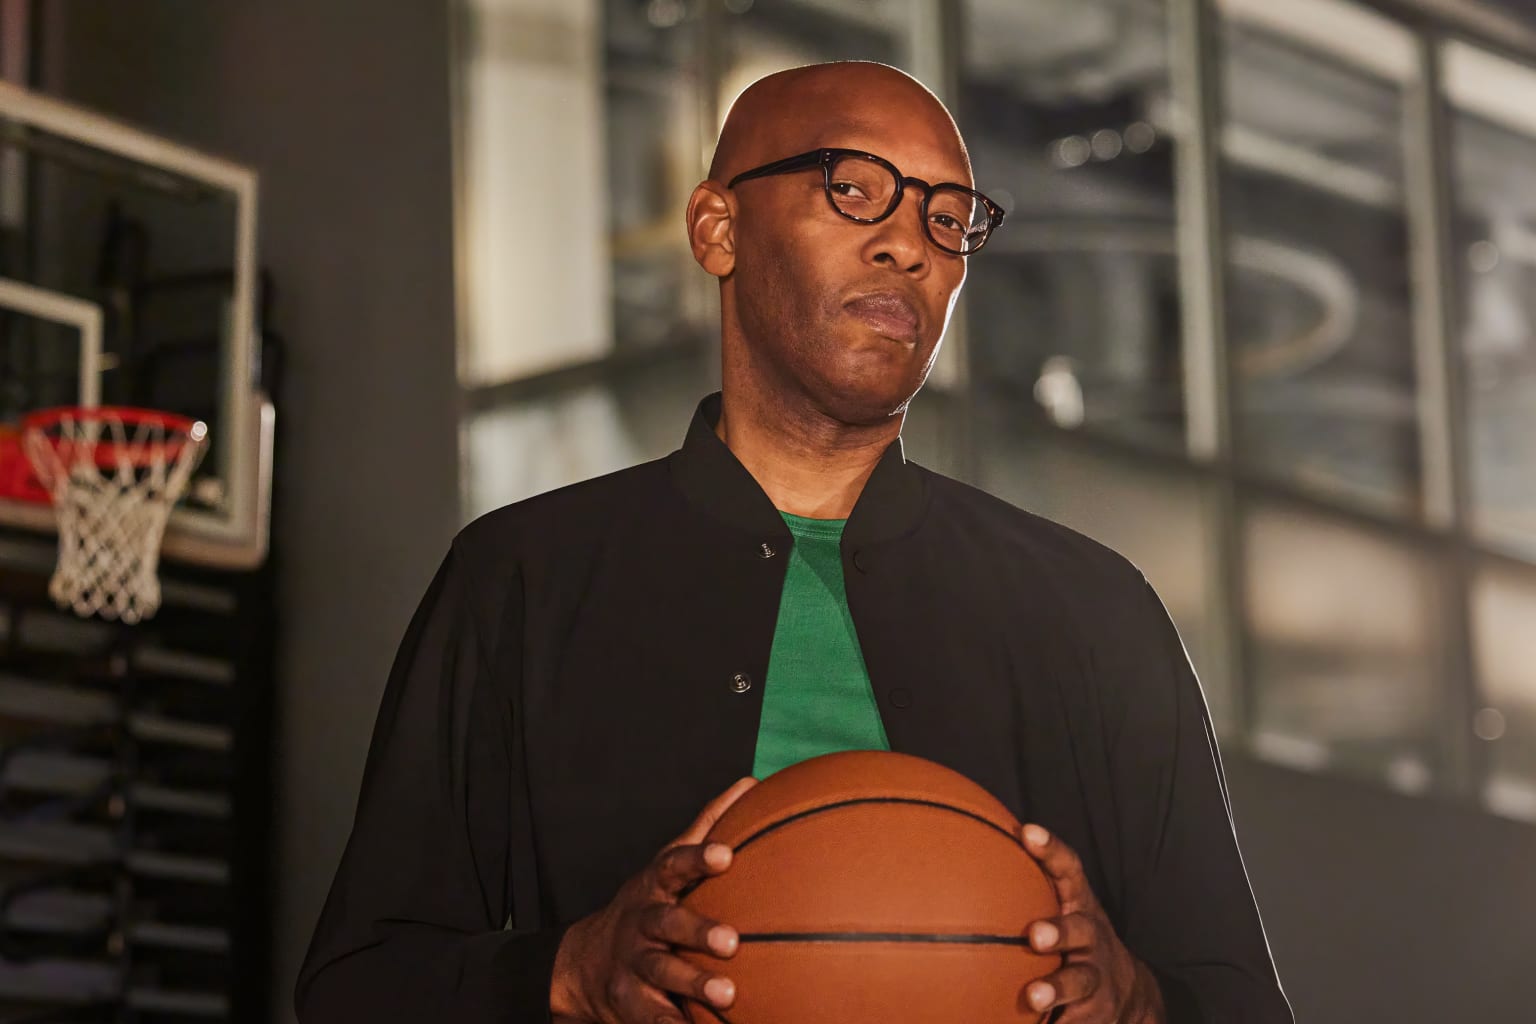 Sam Cassell wearing Zenni eyeglasses presents 'The Coach’s Collection' for Zenni.